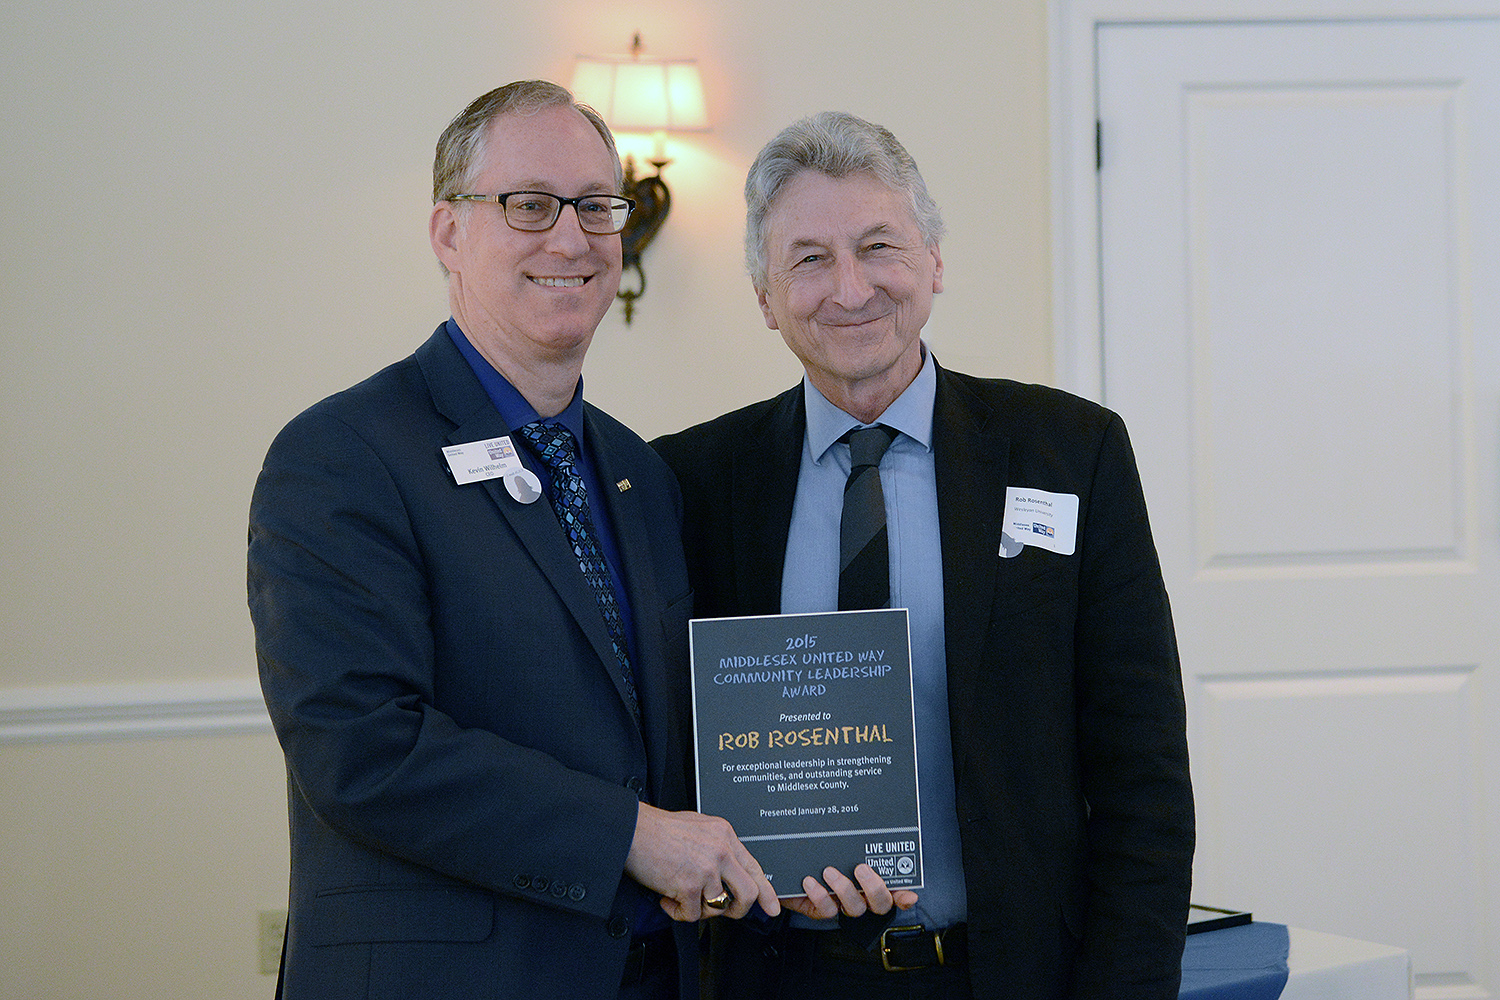 Middlesex United Way Executive Director Kevin Wilhelm presented the award to Rosenthal.